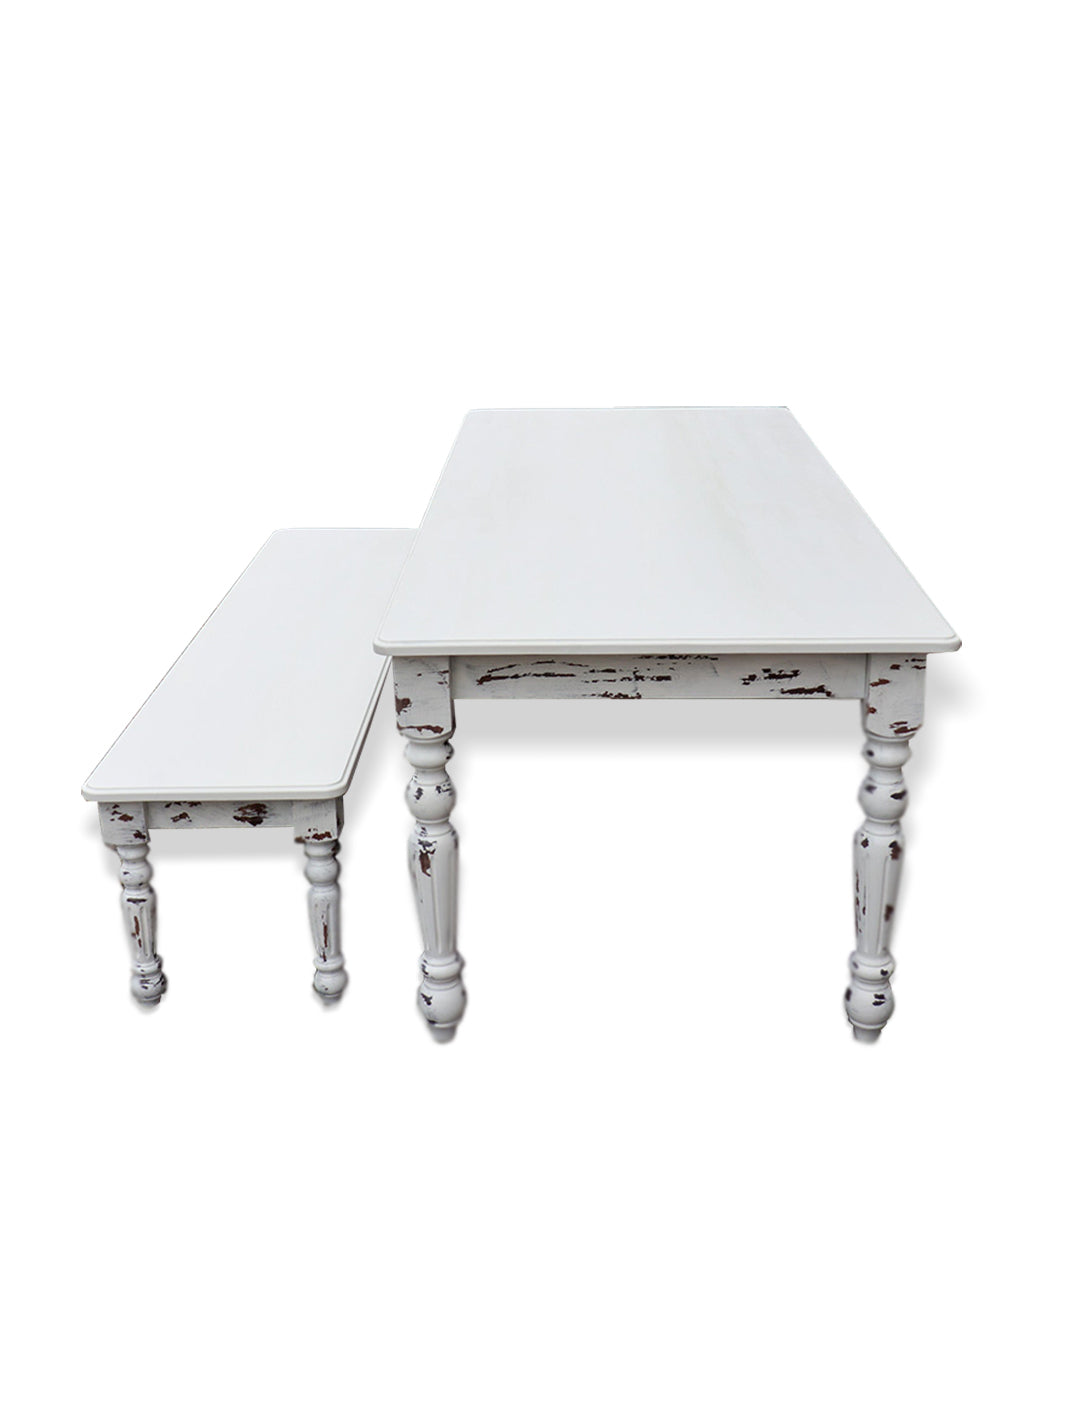 White Farmhouse Dining Table & Bench with Distressed Legs Earthly Comfort Dining Tables ECH1366